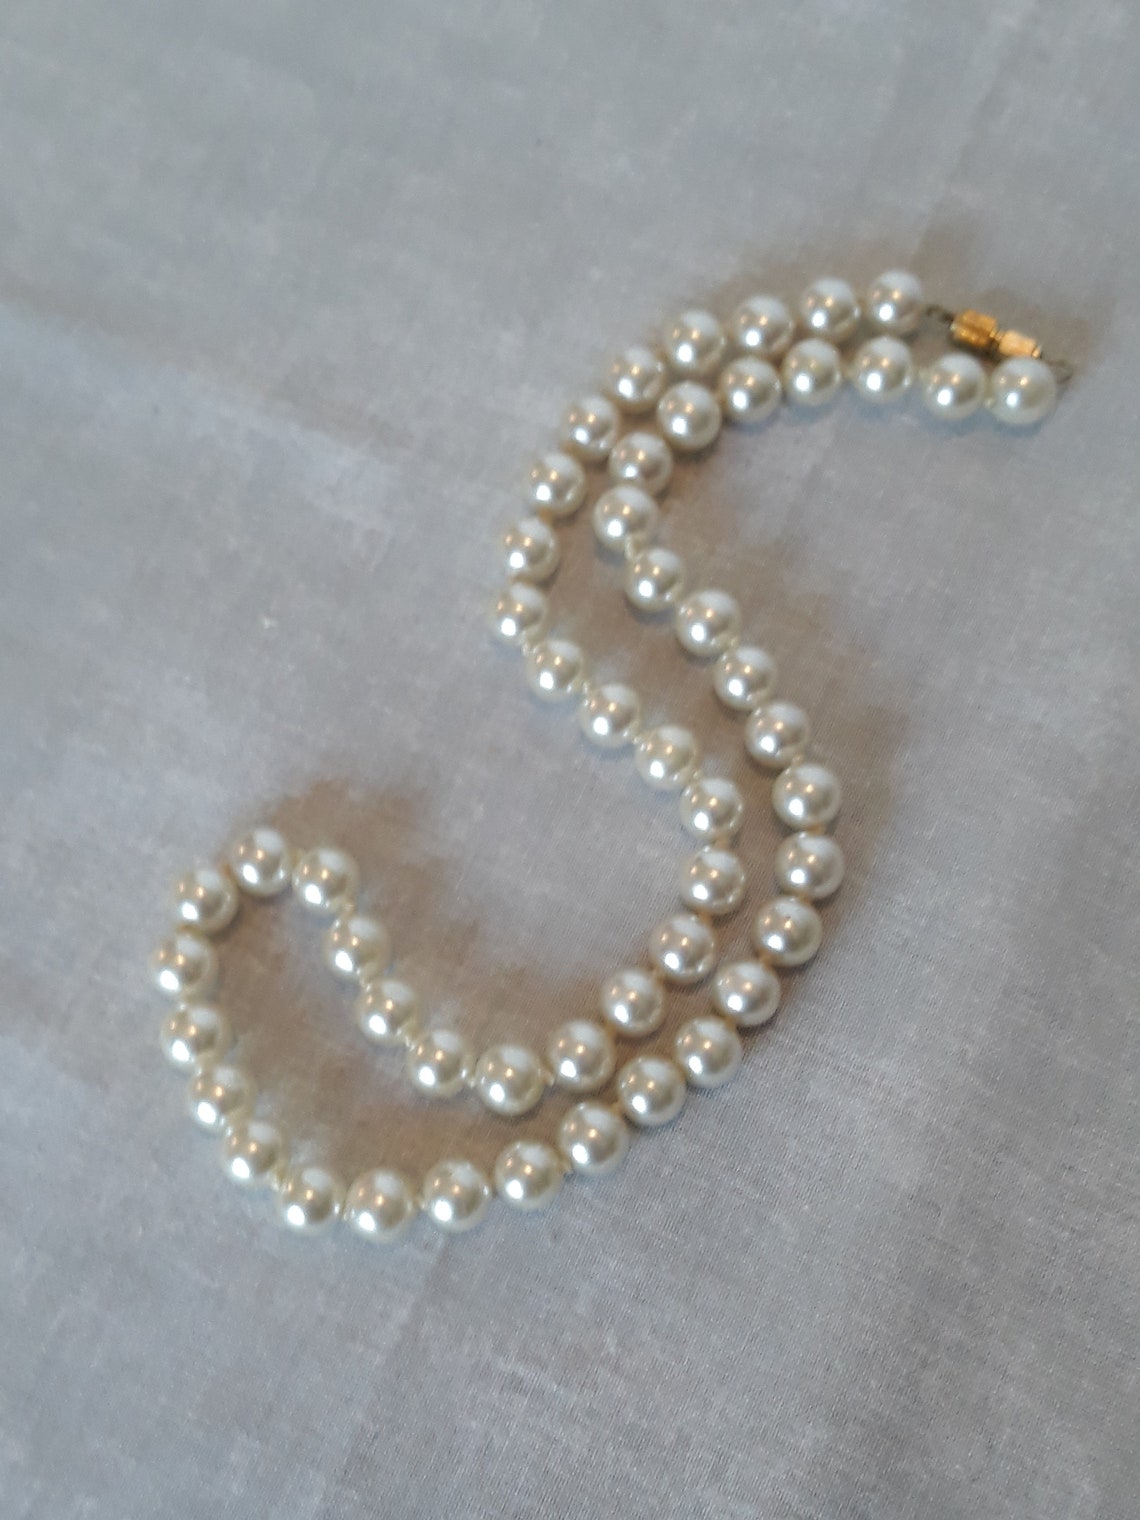 Beautiful String of Faux Pearls With a Gold-tone Barrel Clasp - Etsy